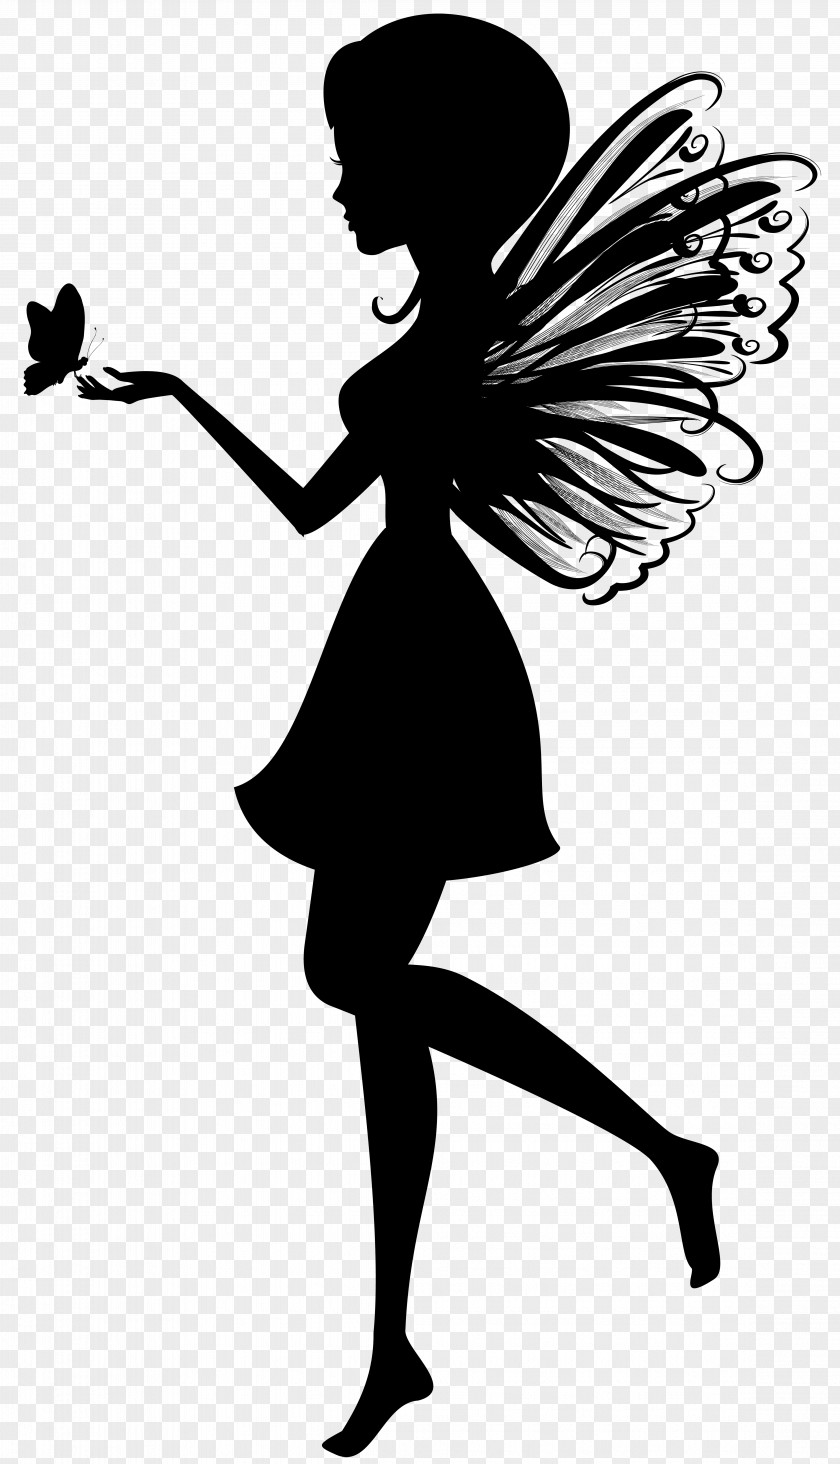 Fairy With Butterfly Silhouette Clip Art Image PNG